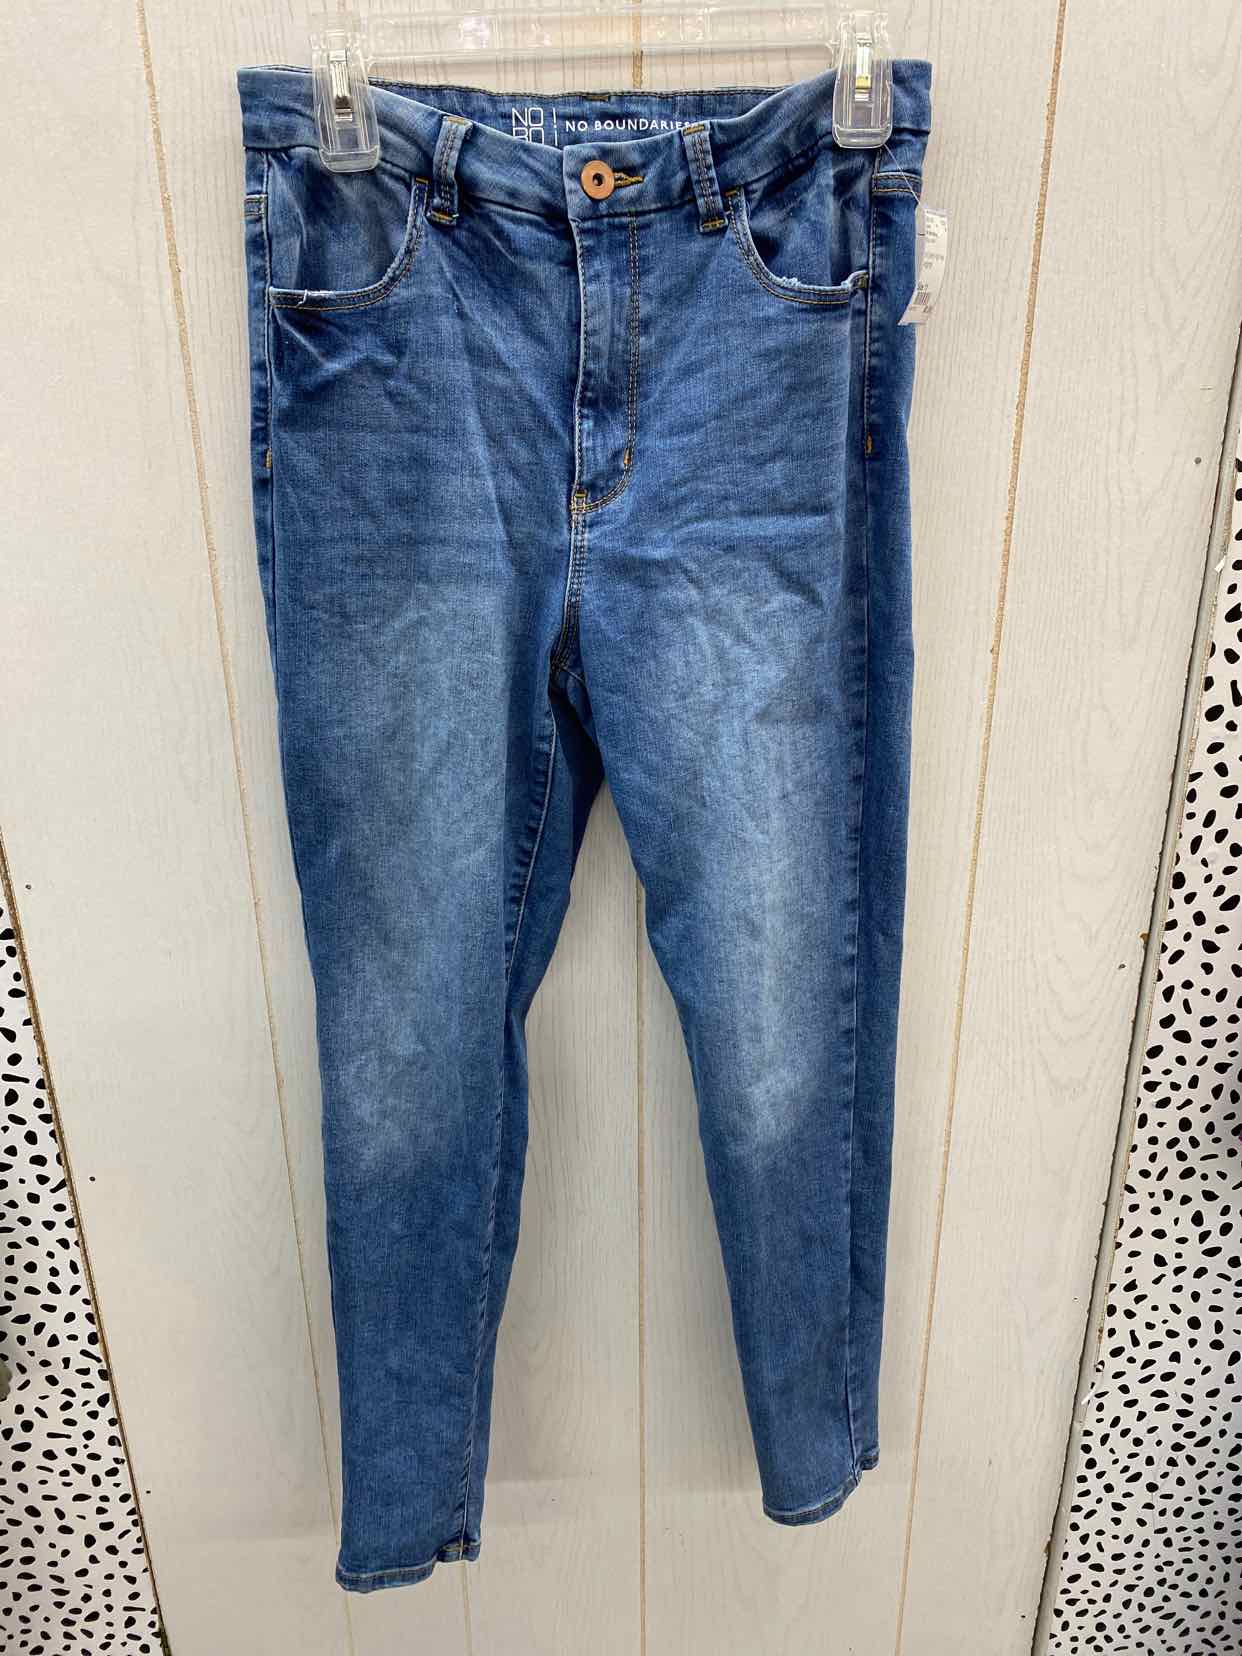 No Boundaries Blue Junior Size 11 Jeans – Twice As Nice Consignments